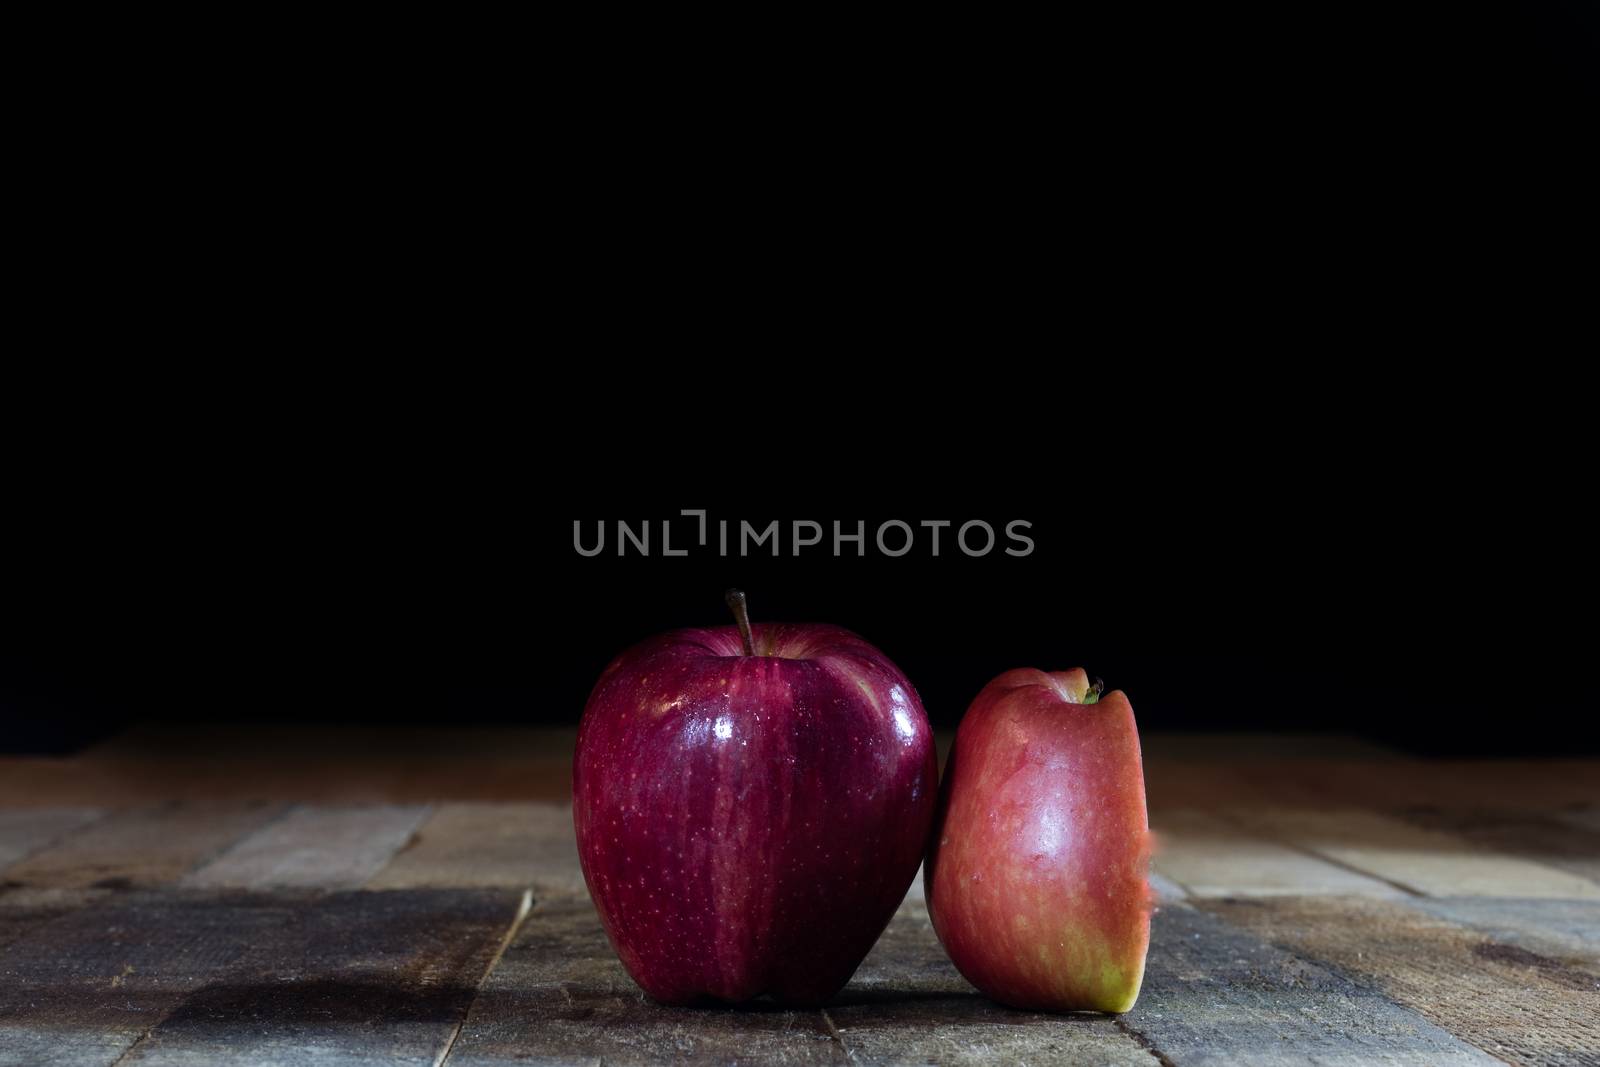 Red tasty wet apple on a wooden table. Black background.